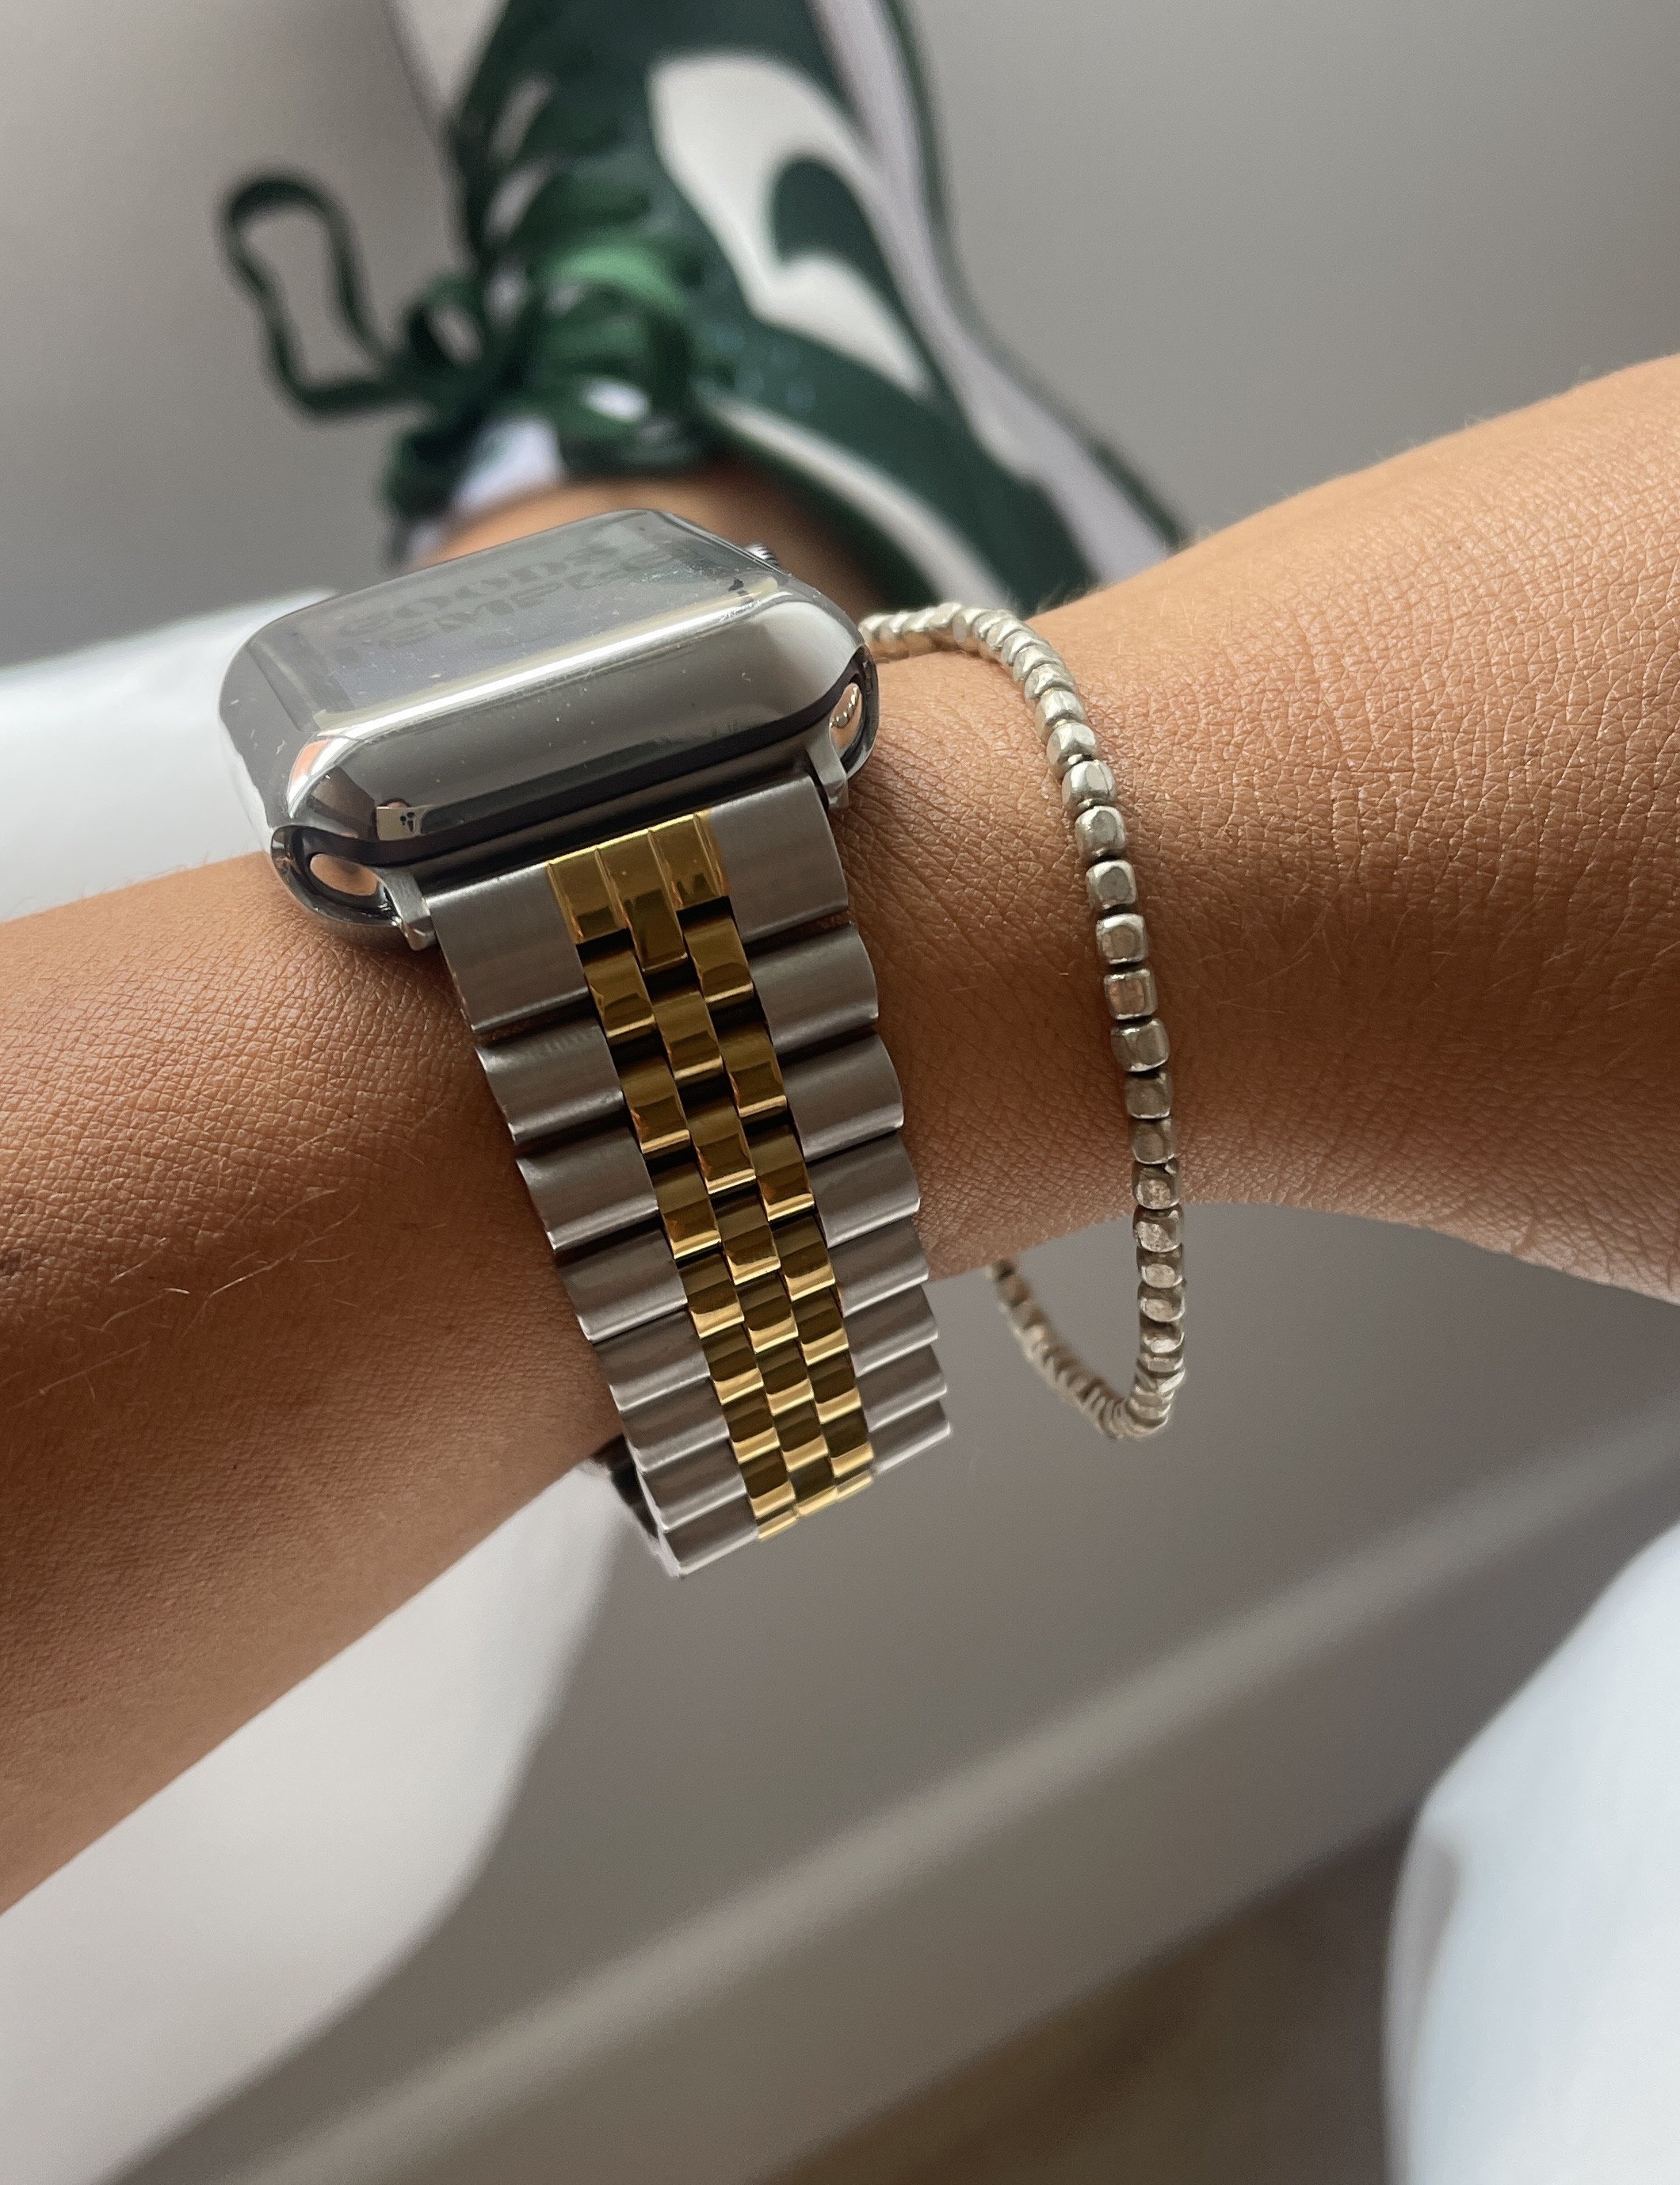 Gold and Silver Apple Watch Band Jubilee Stainless Steel Metal